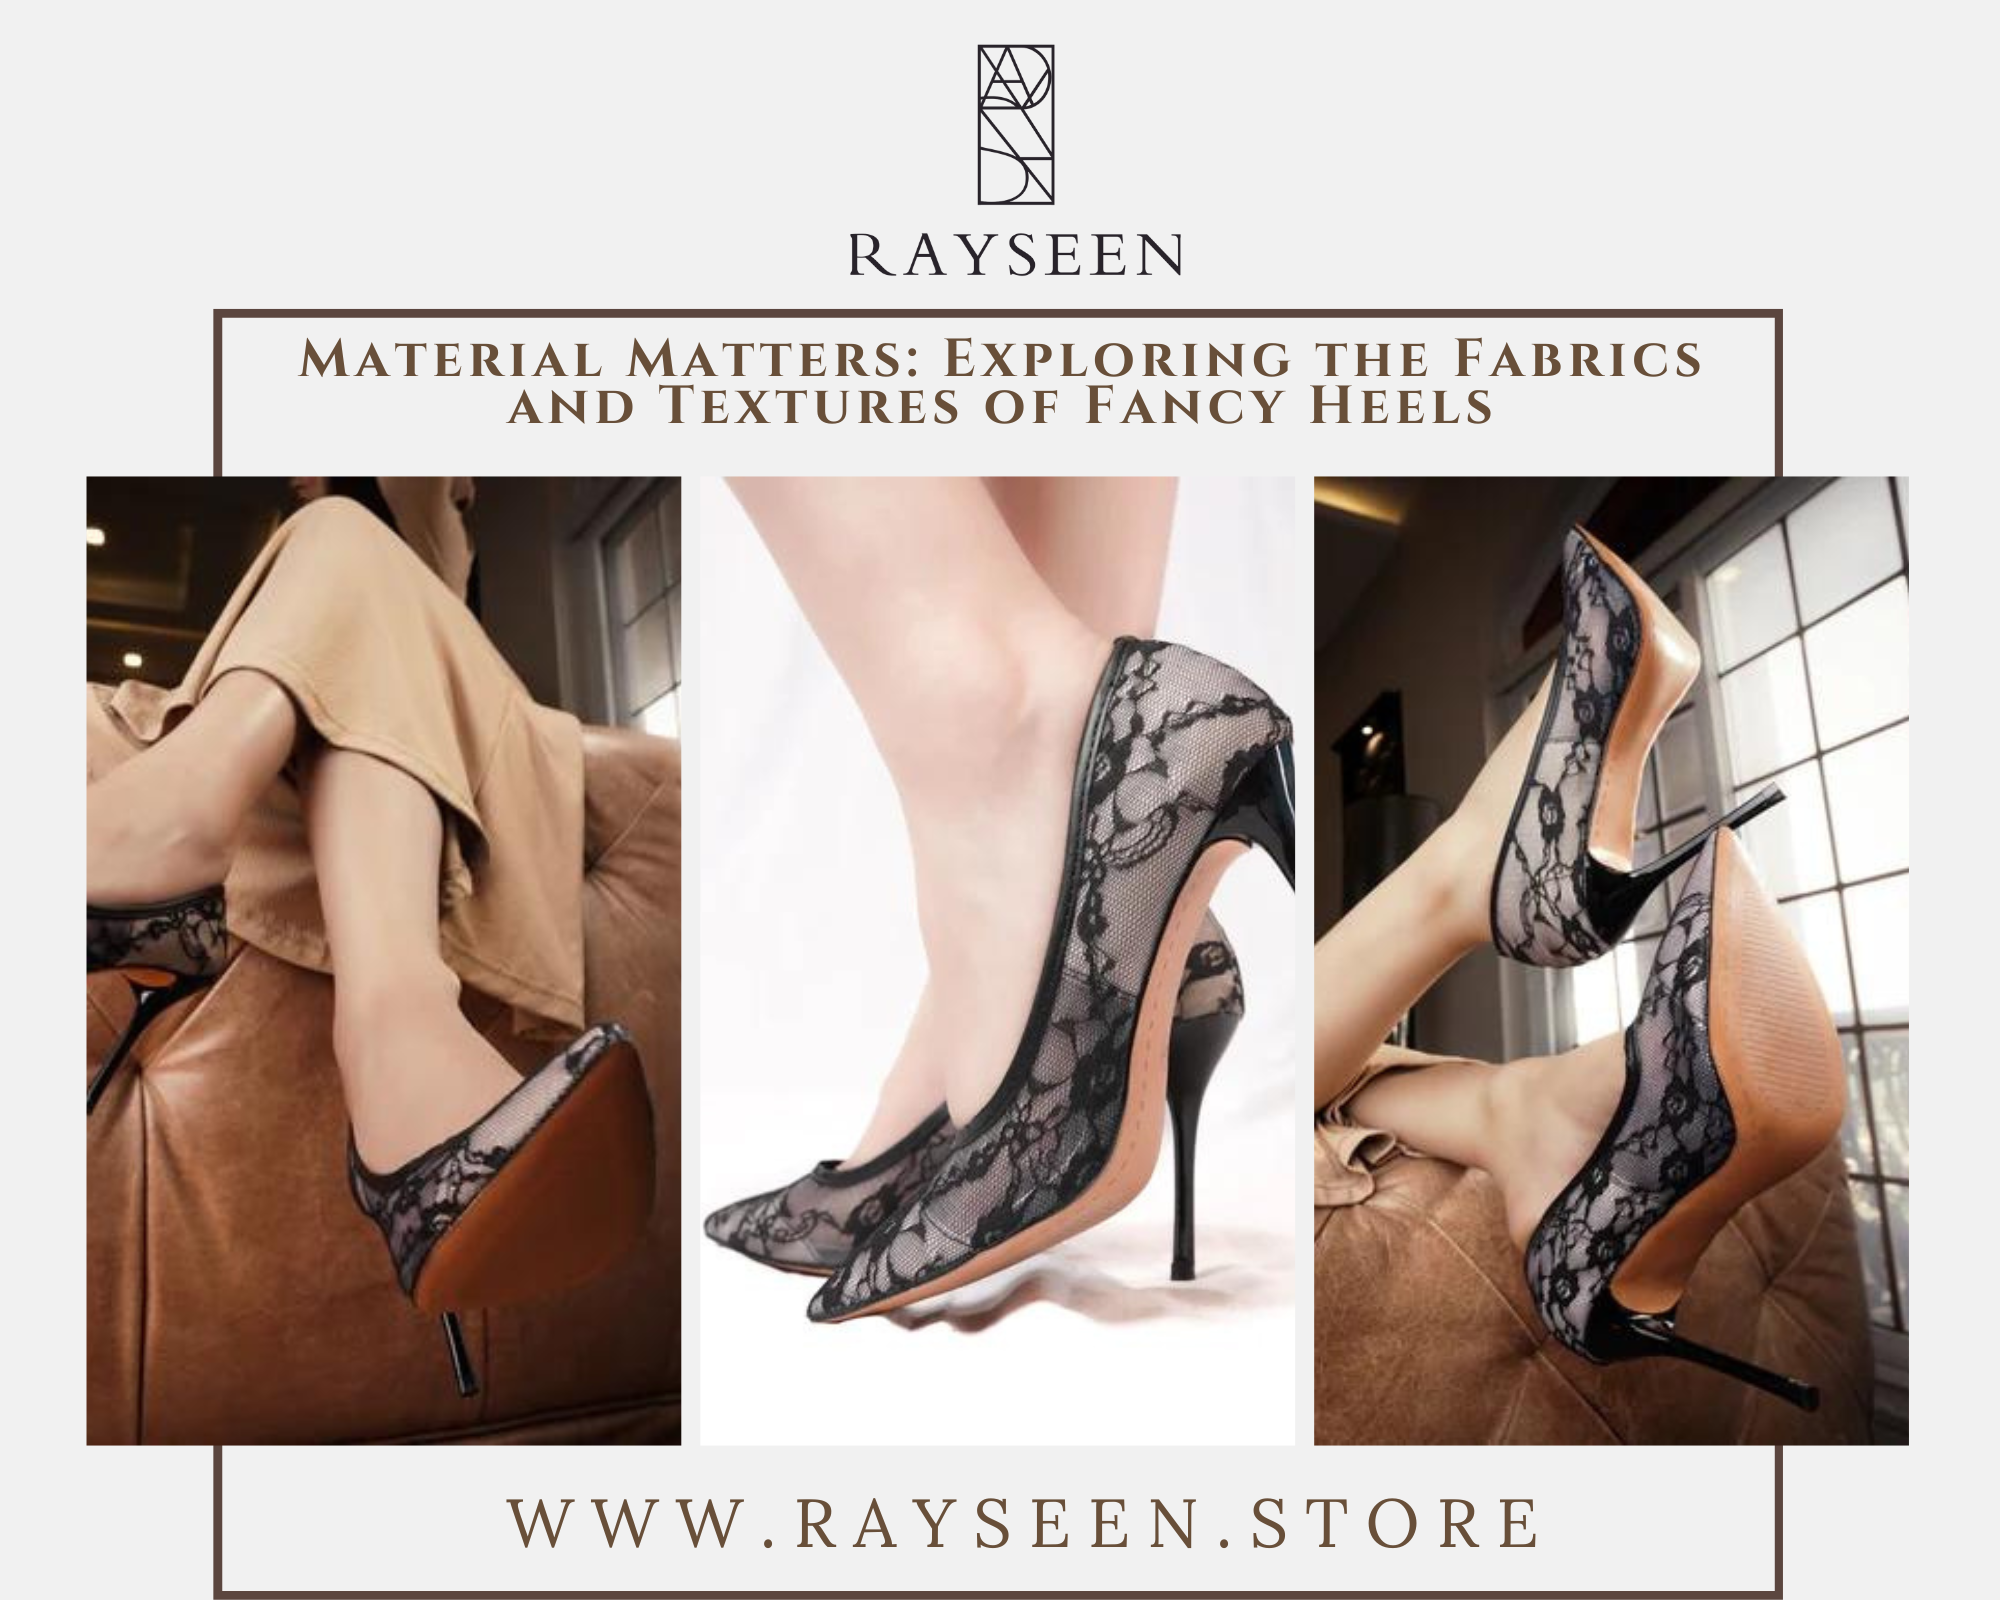 Material Matters Exploring the Fabrics and Textures of Fancy Heels